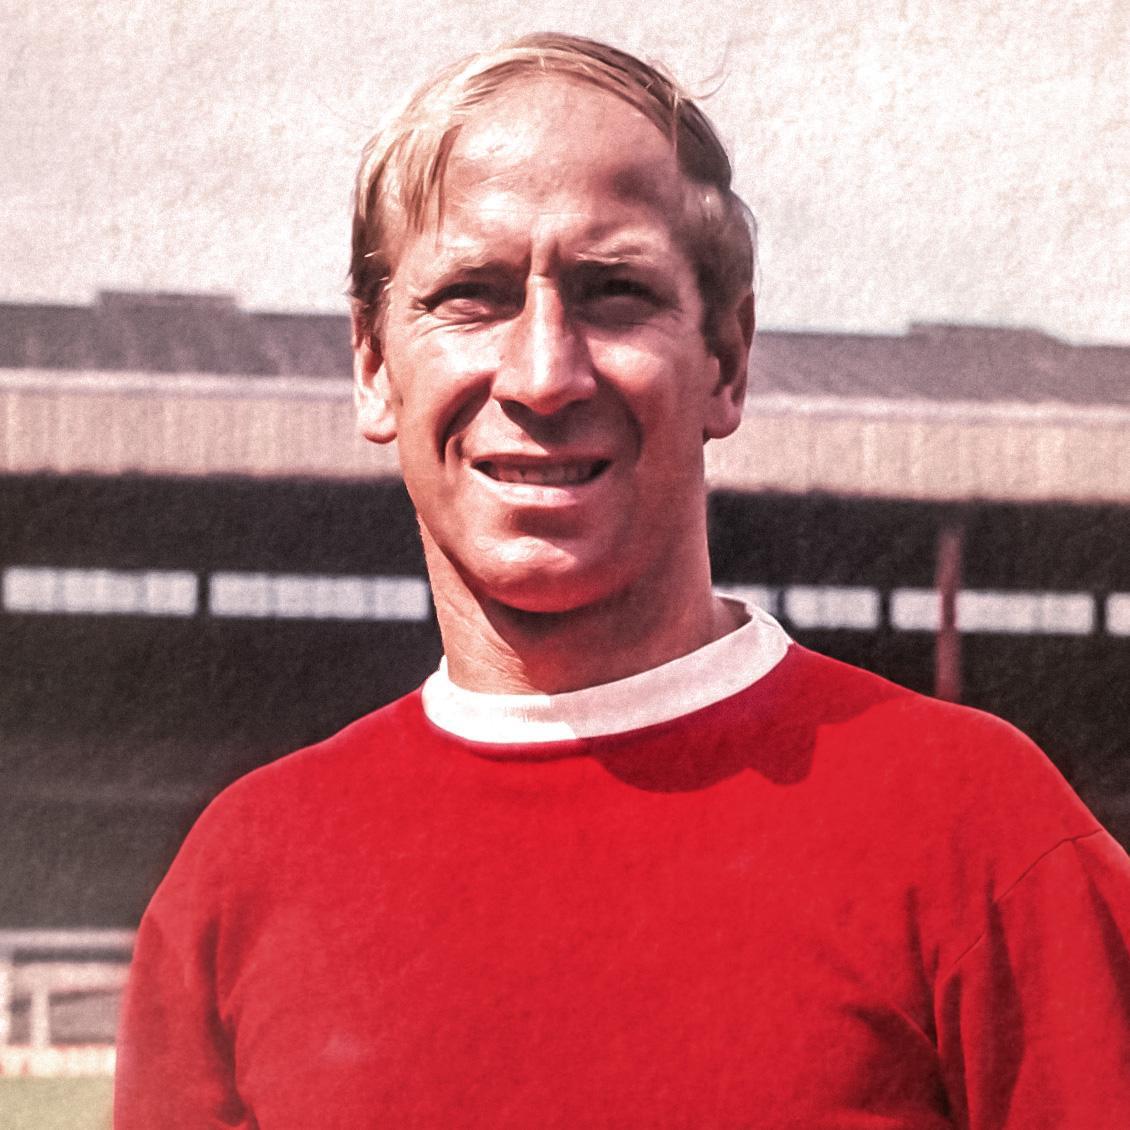 Manchester United top scorers all-time - Sir Bobby Charlton